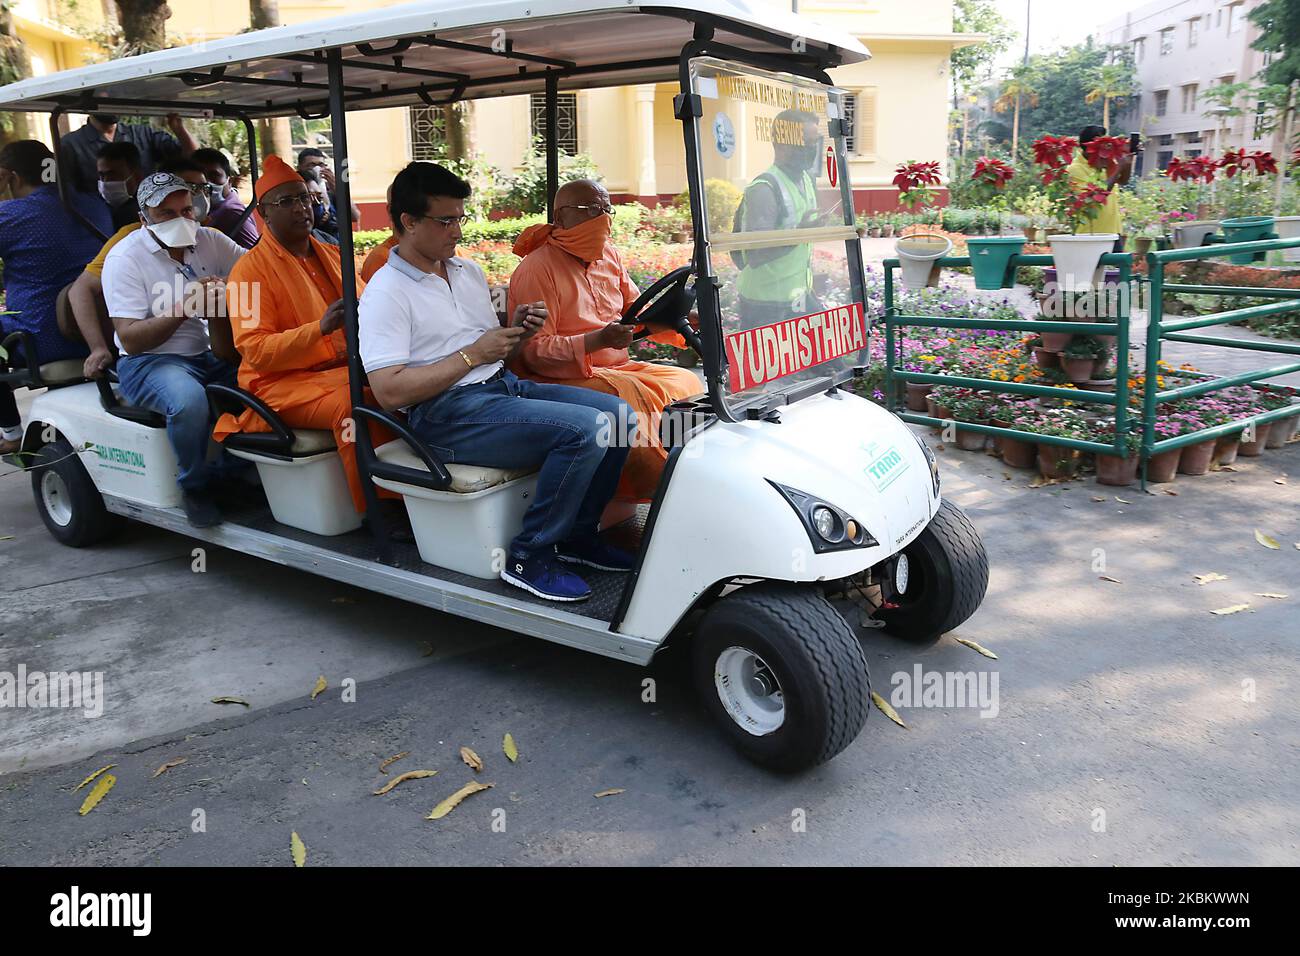 BCCI president Sourav Ganguly ride Electric Vehicle Golf Cart and donated 2000 kilograms of rice on April 01,2020 at Belur Math, the headquarters of the Ramkrishna Mission, to help feed those in need in the wake of national lockdown due to COVID 19 ,coronavirus.The former India captain was seen wearing a black mask and taking a tour of the Ramkrishna Mission headquarters with the monks in a golf cart. (Photo by Debajyoti Chakraborty/NurPhoto) Stock Photo